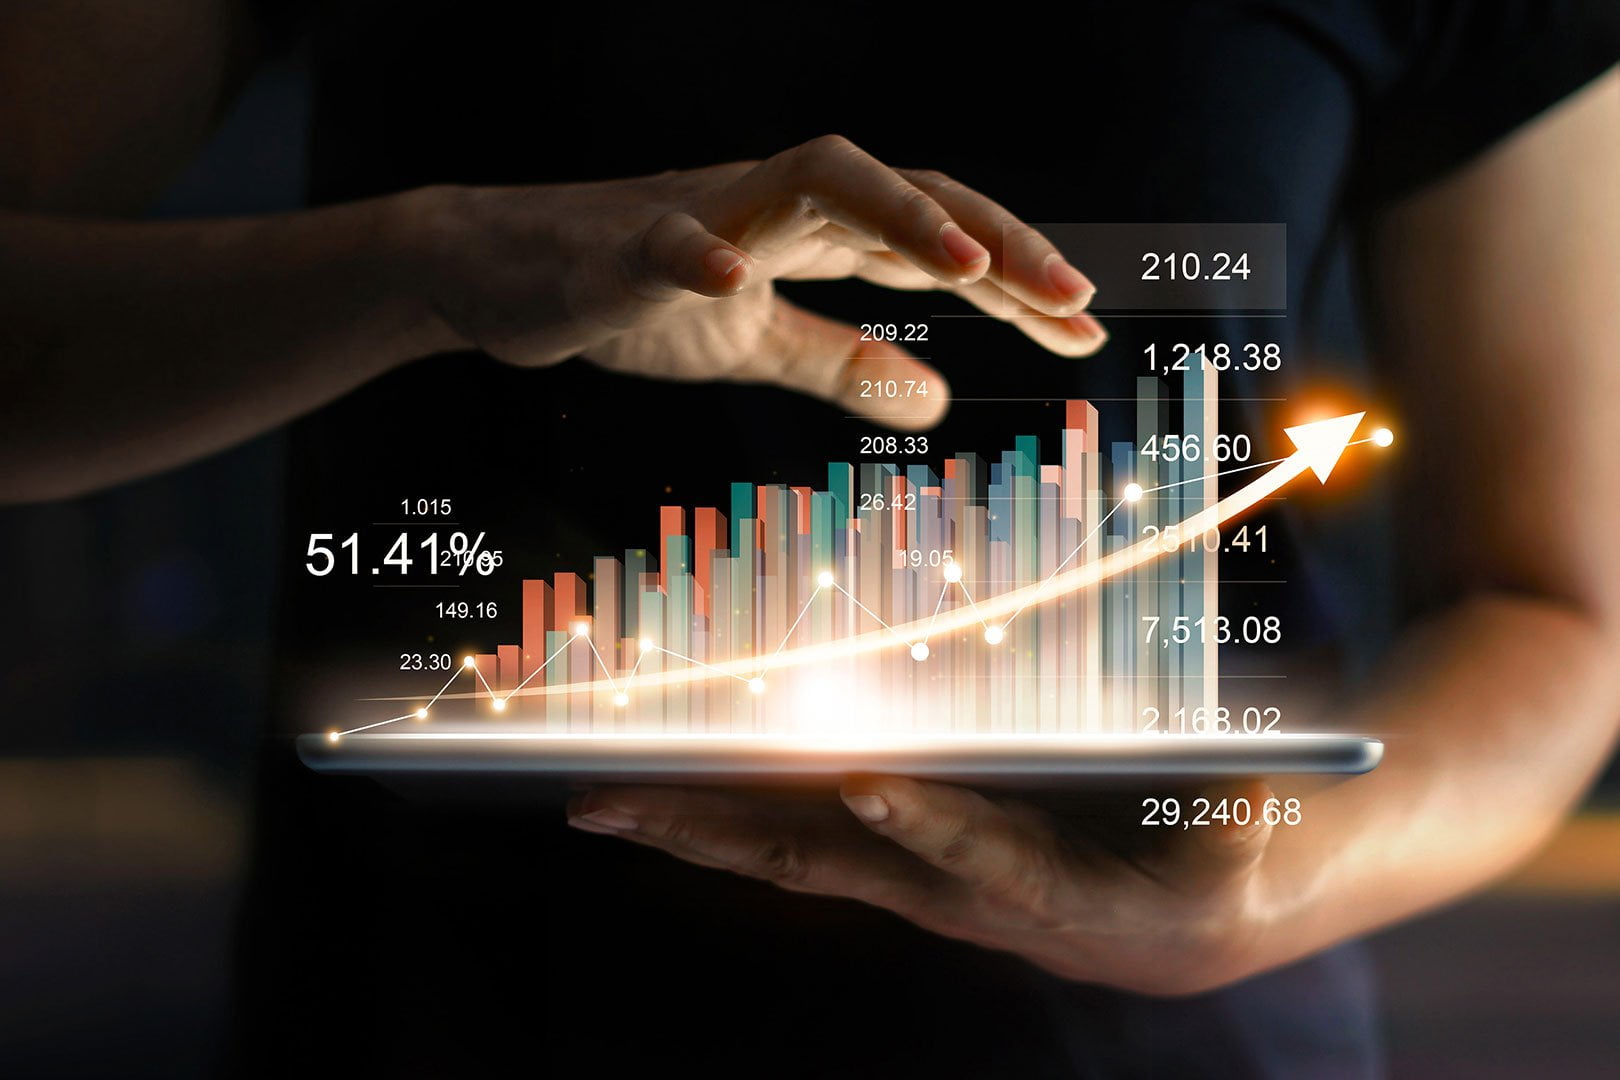 Digital Transformation Statistics You Need To Know In Data